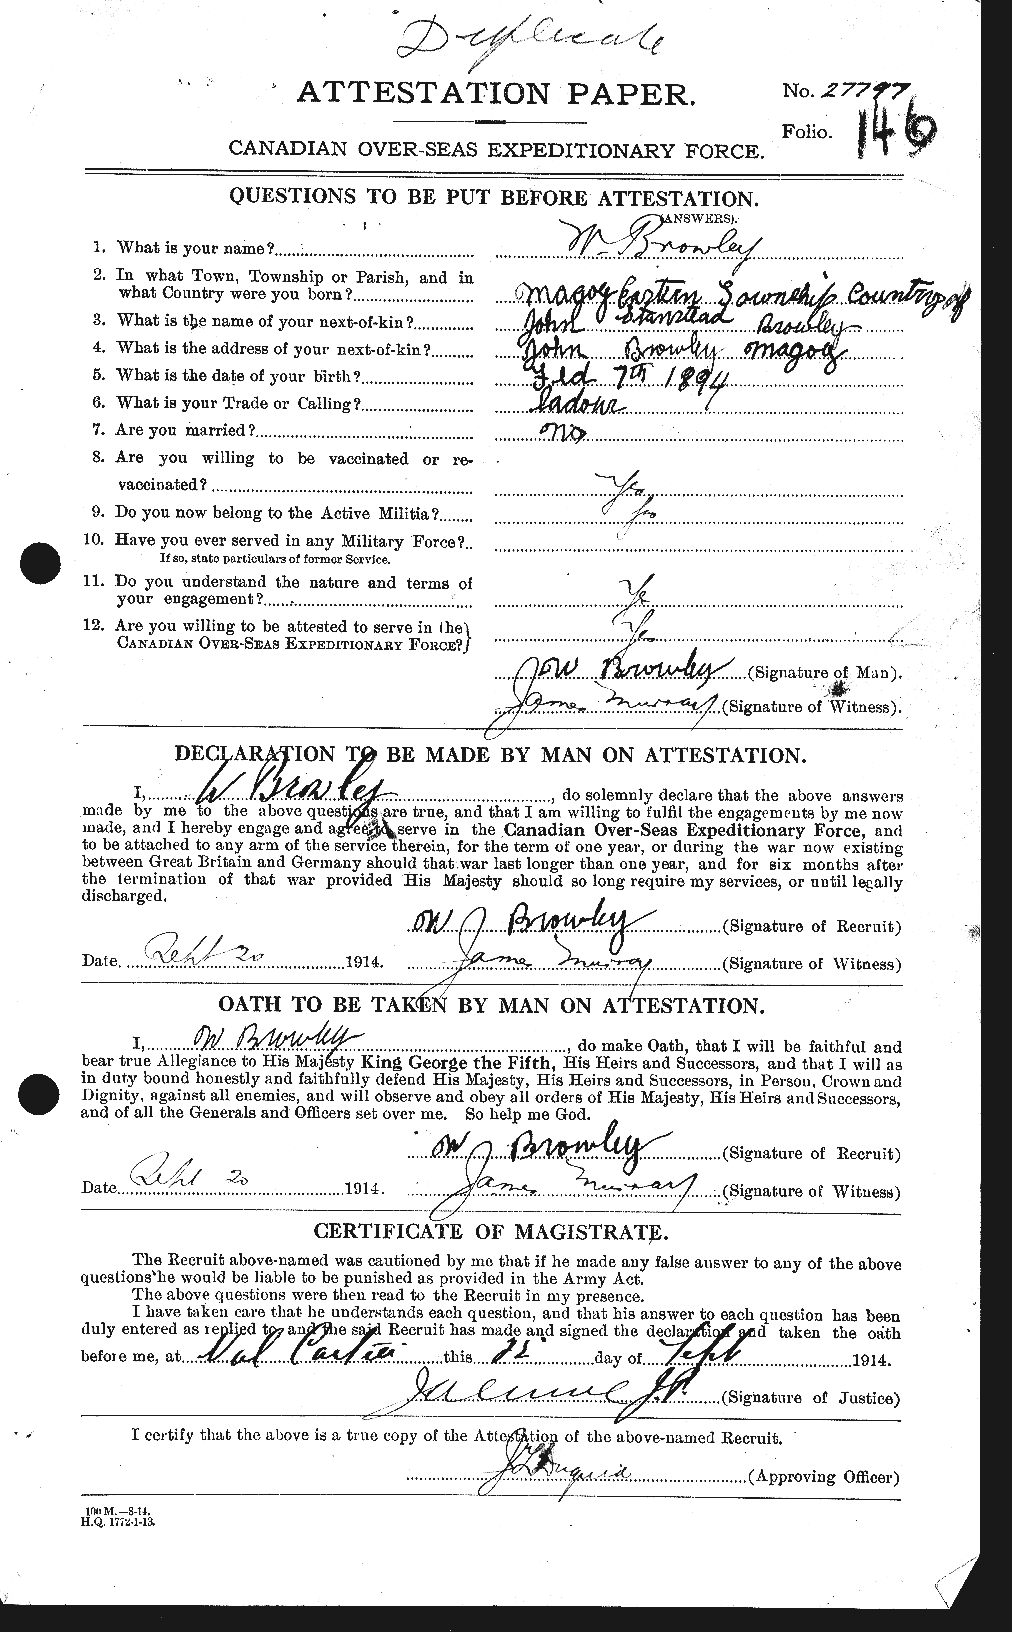 Personnel Records of the First World War - CEF 266850a